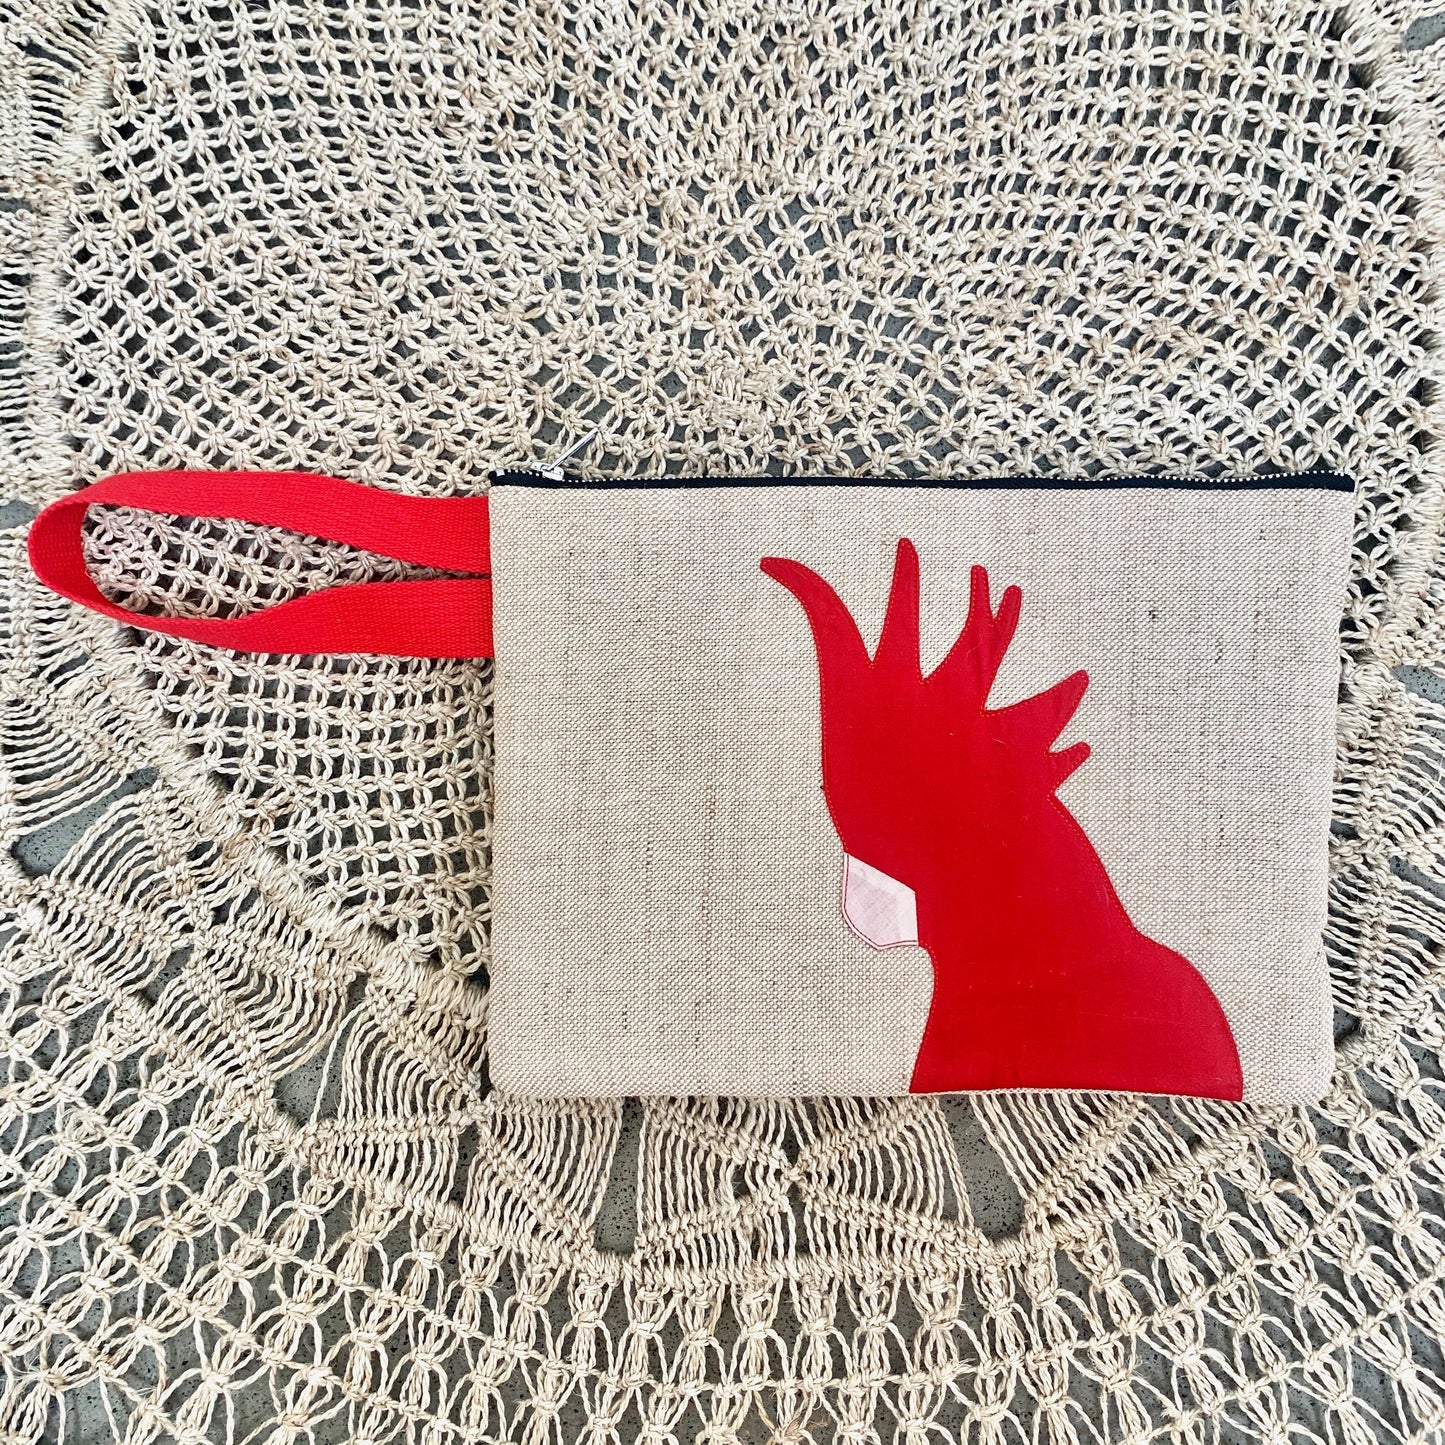 Cockatoo Jute Clutch in Red Bags and purses WEFTshop 